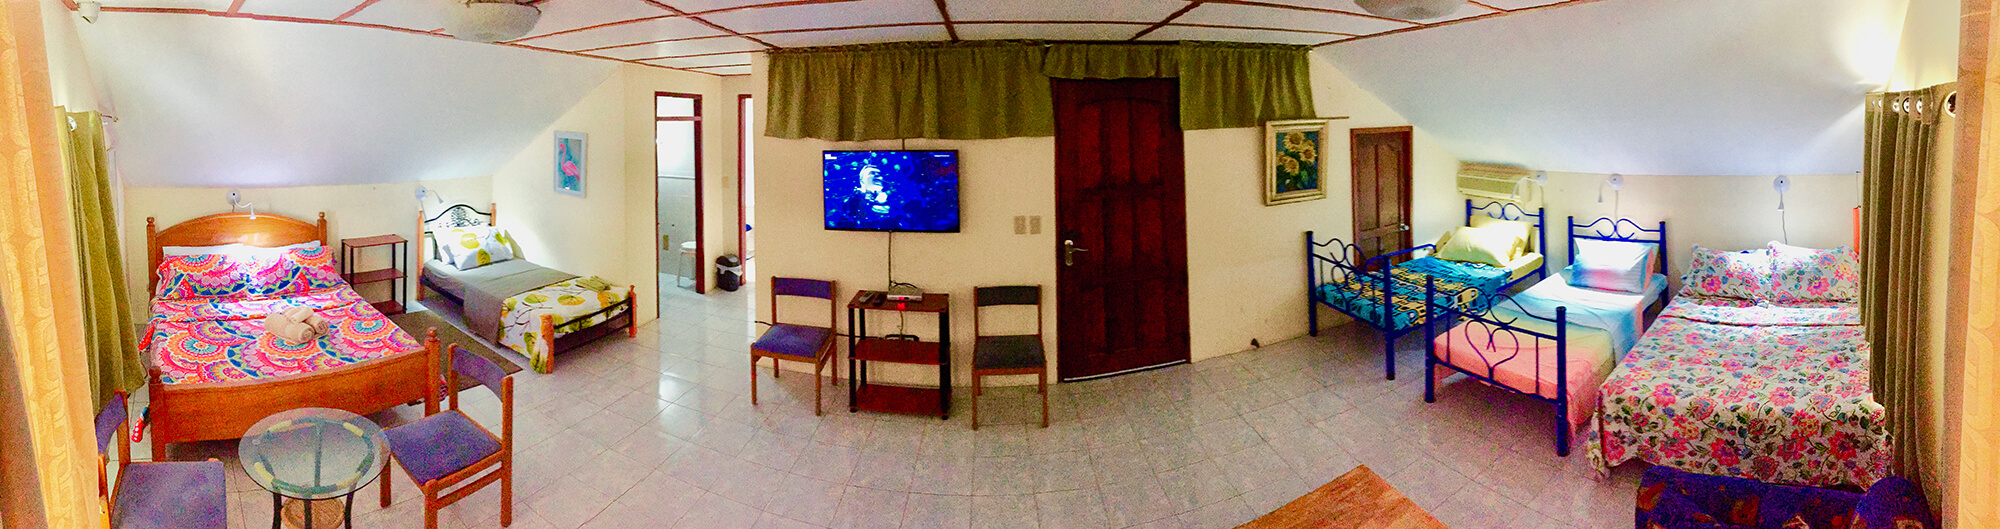 Deluxe Family Room Panorama